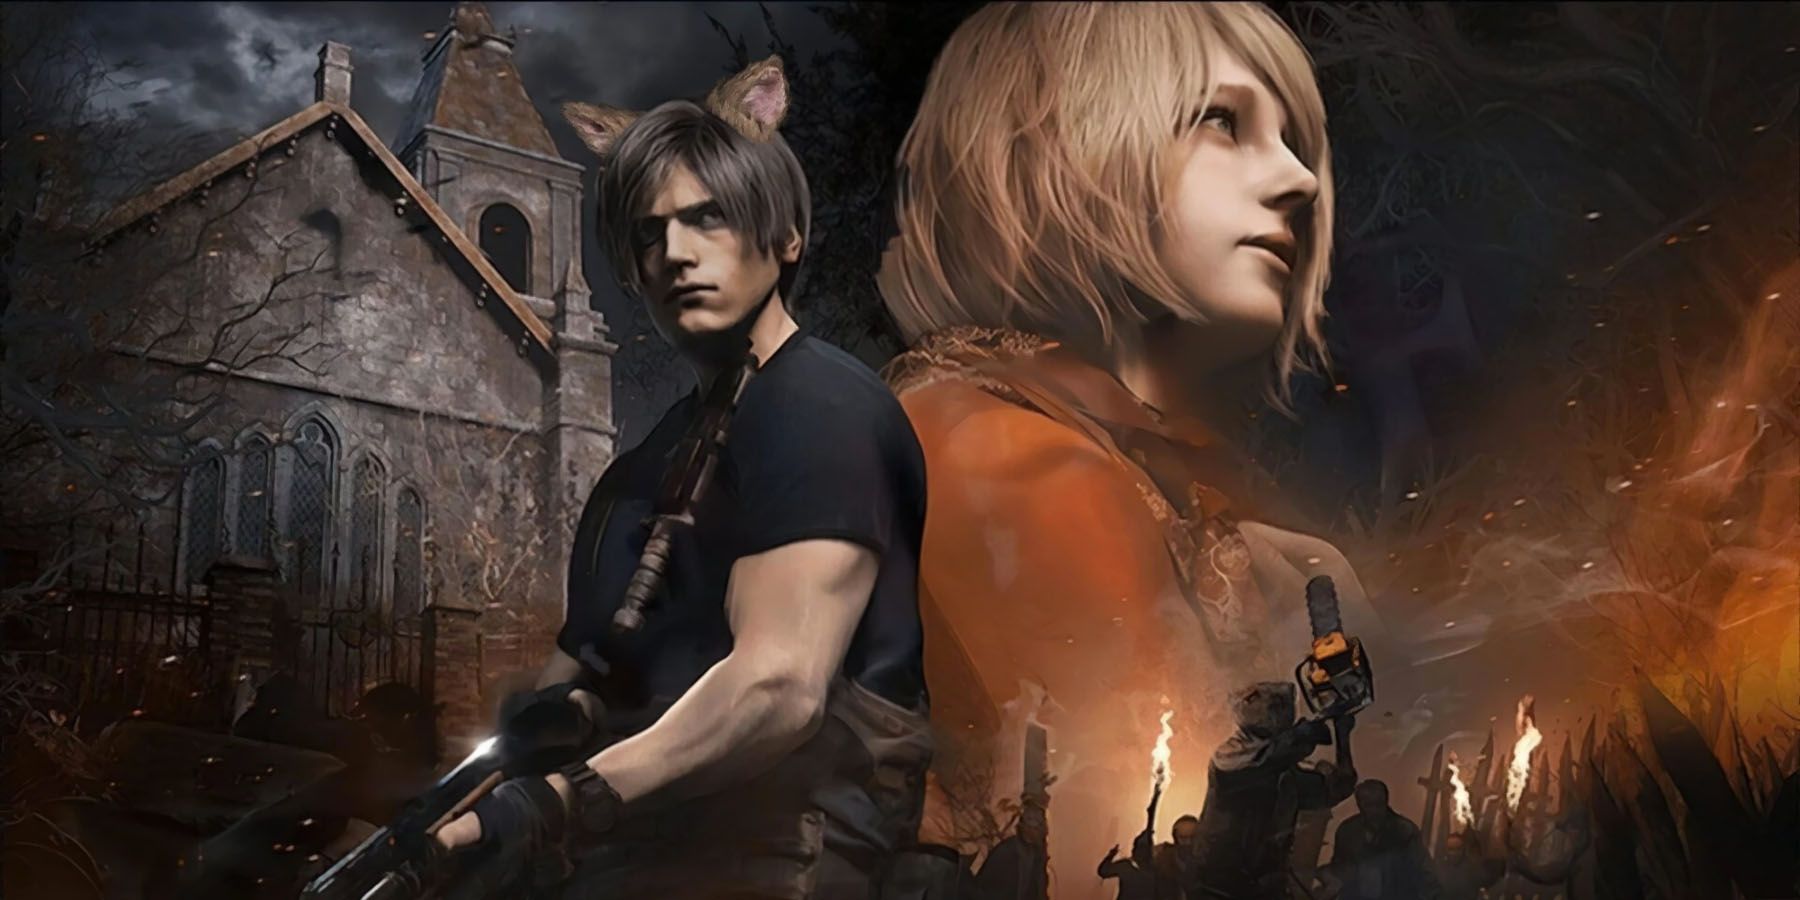 Steam updates hint that the Resident Evil 4 Ada DLC may drop soon